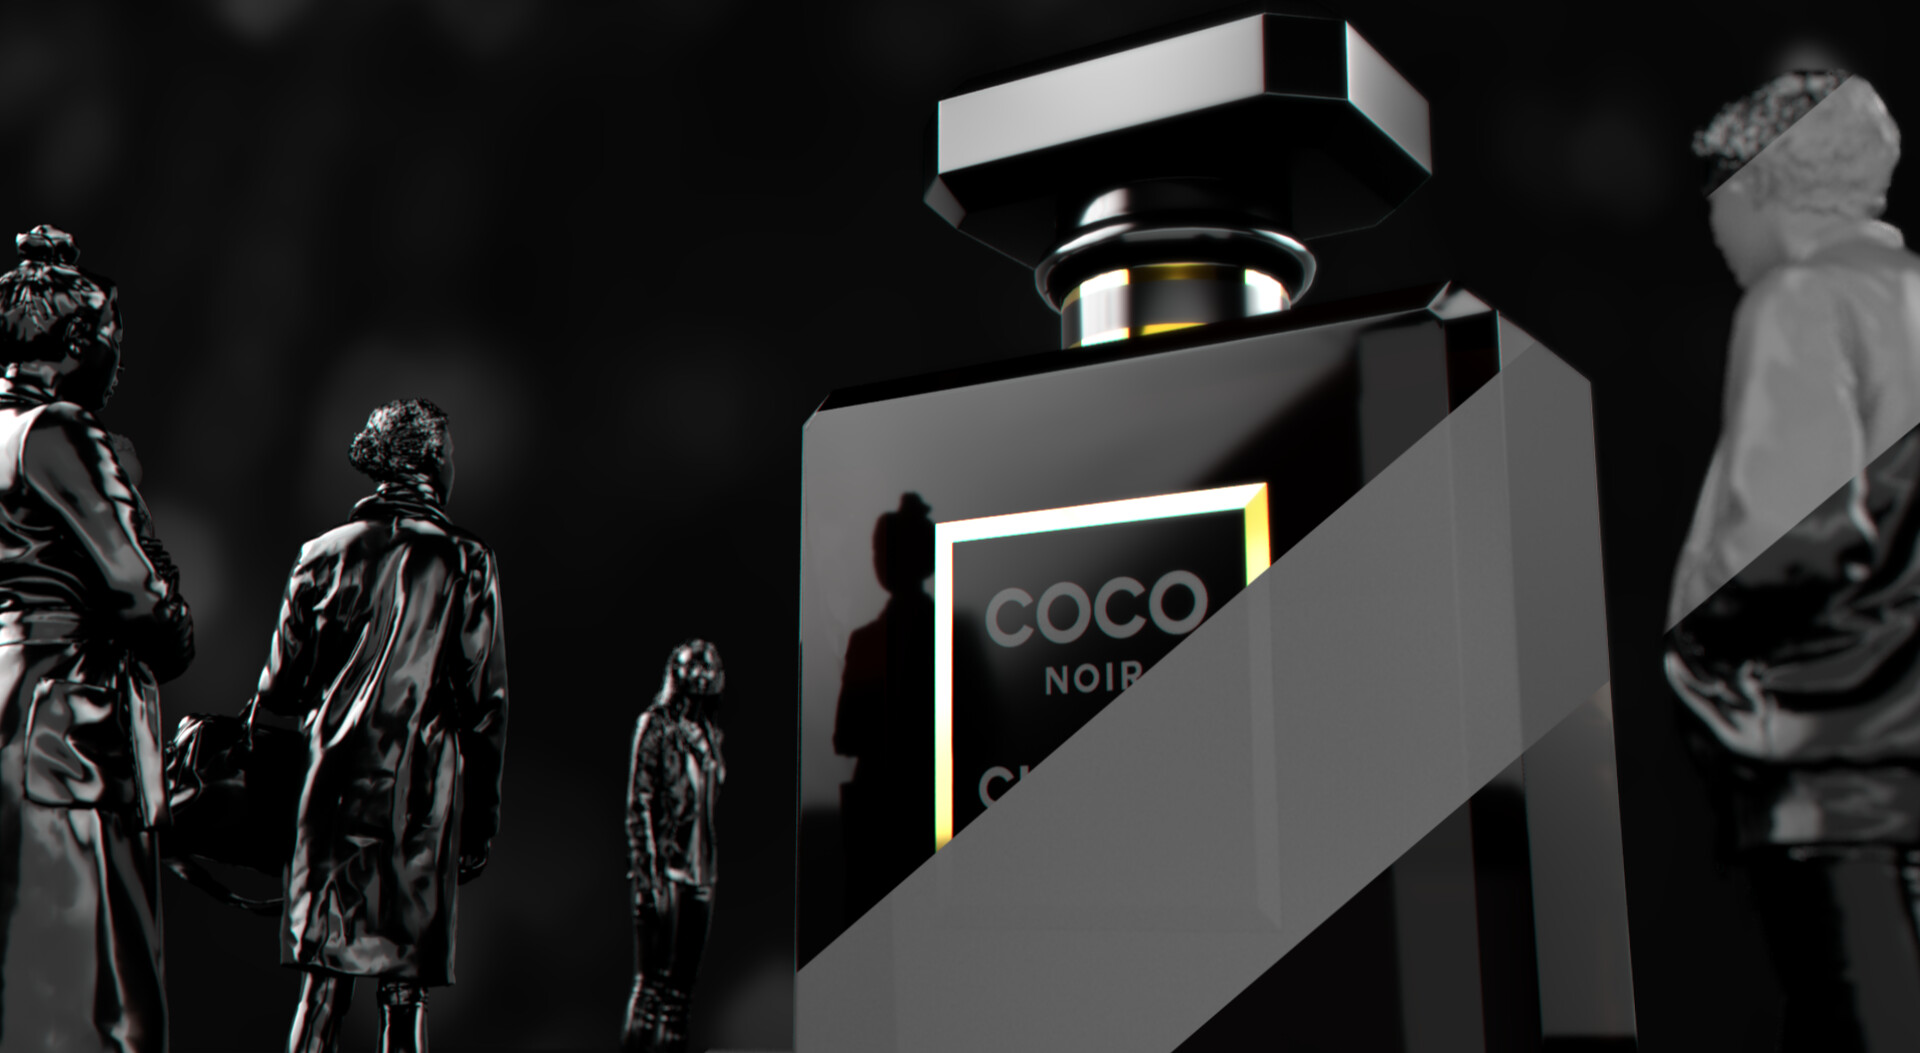 Coco Noir Perfume by Chanel